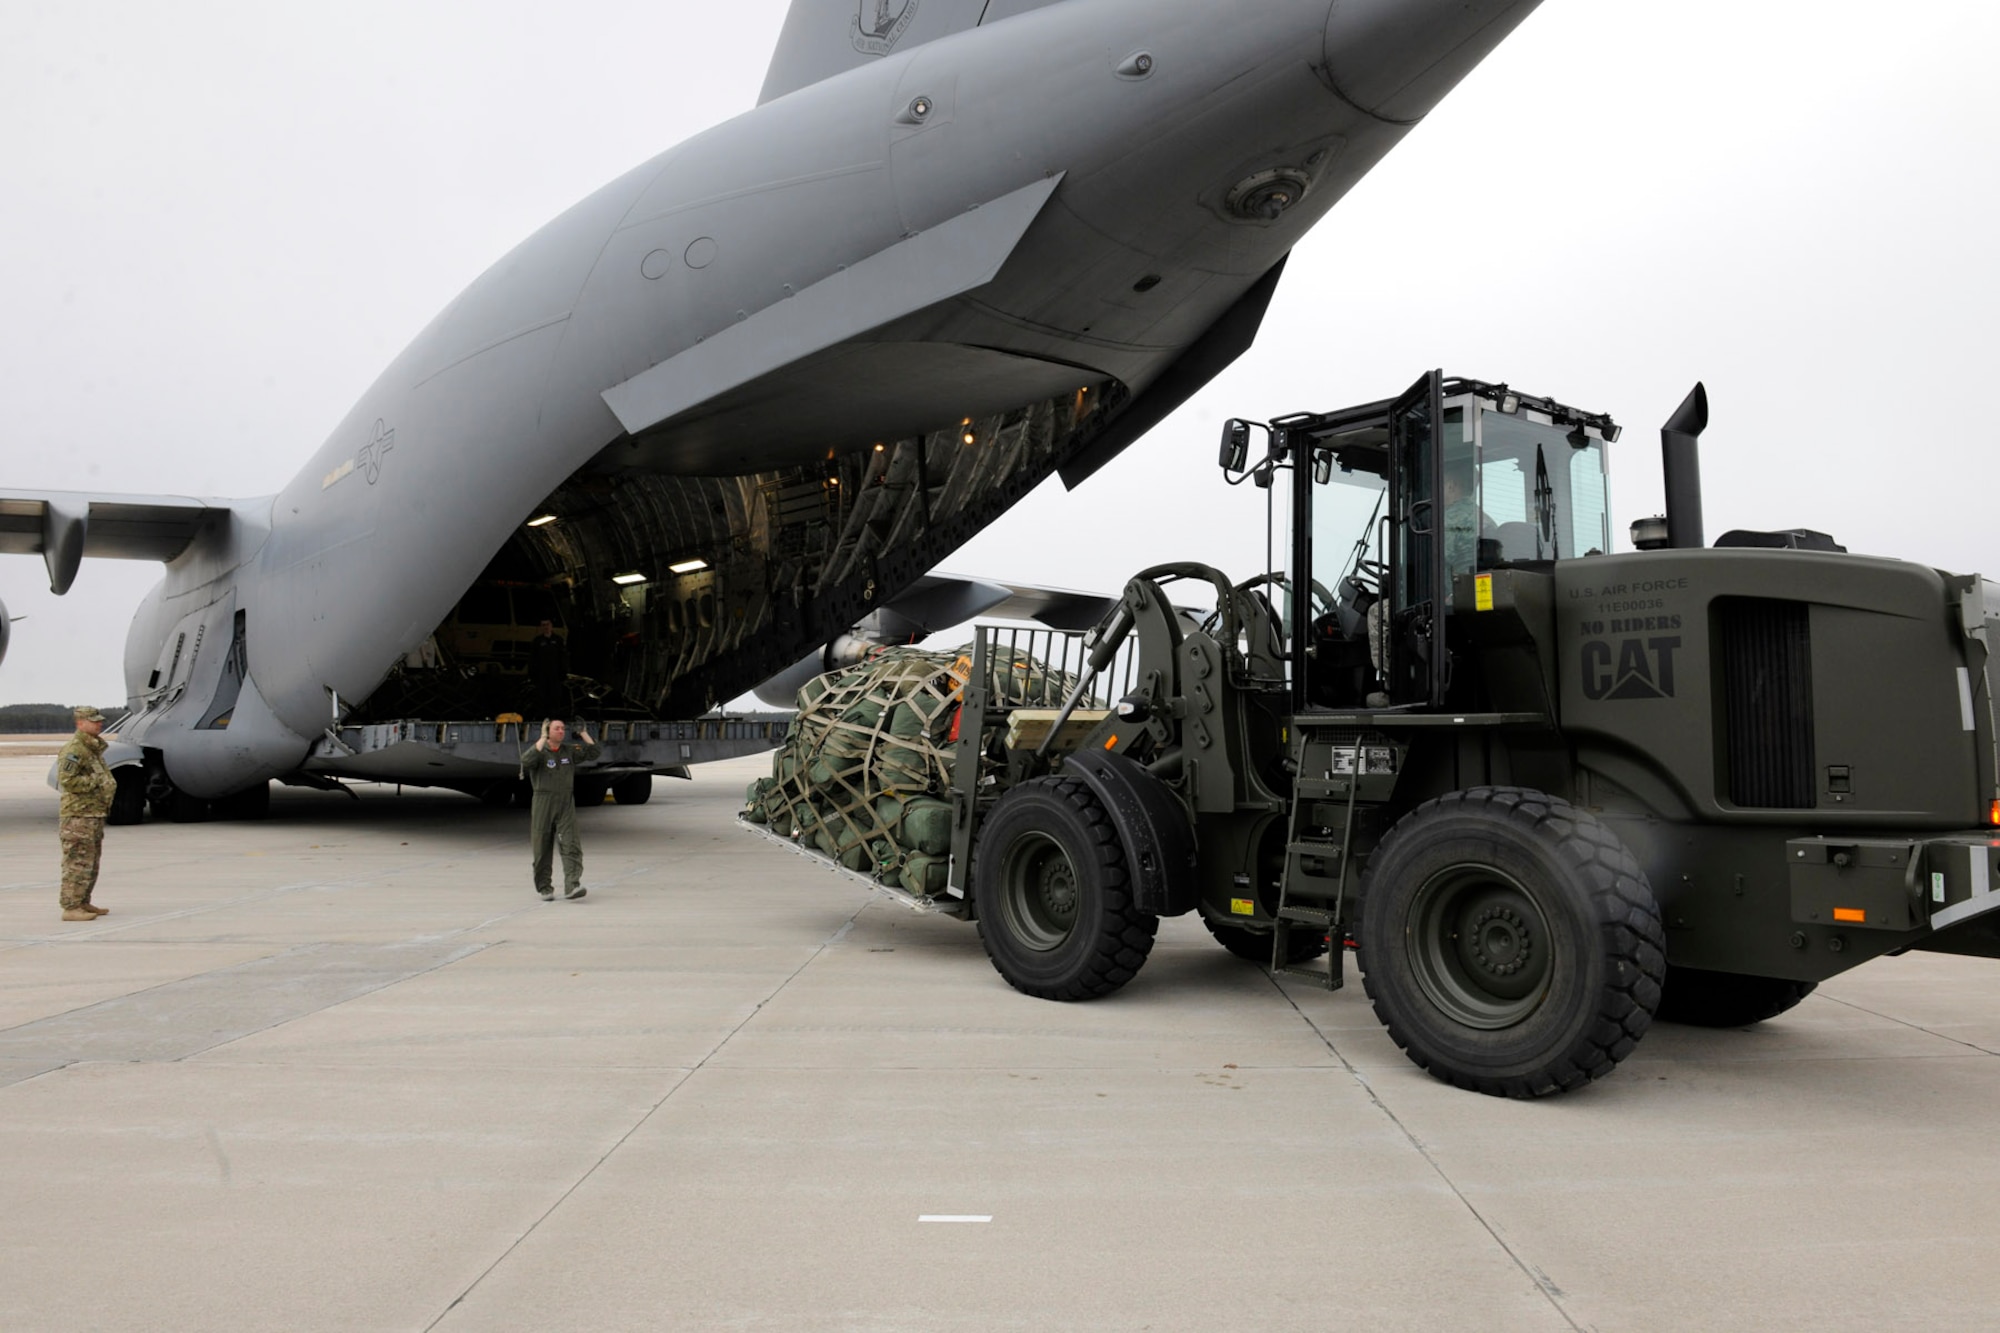 150319-Z-EZ686-496 – Soldiers, trucks, artillery pieces and other equipment from the 119th Field Artillery, Michigan Army National Guard, are loaded into a C-17 Globemaster III operated by the Mississippi Air National Guard at the Alpena Combat Readiness Training Center, Mich., March 19, 2015. The equipment was loaded by Airmen from the 127th Logistics Readiness Squadron of the Michigan Air National Guard, which provides aerial port services to military units across the state of Michigan. (U.S. Air National Guard photo by Master Sgt. David Kujawa) 